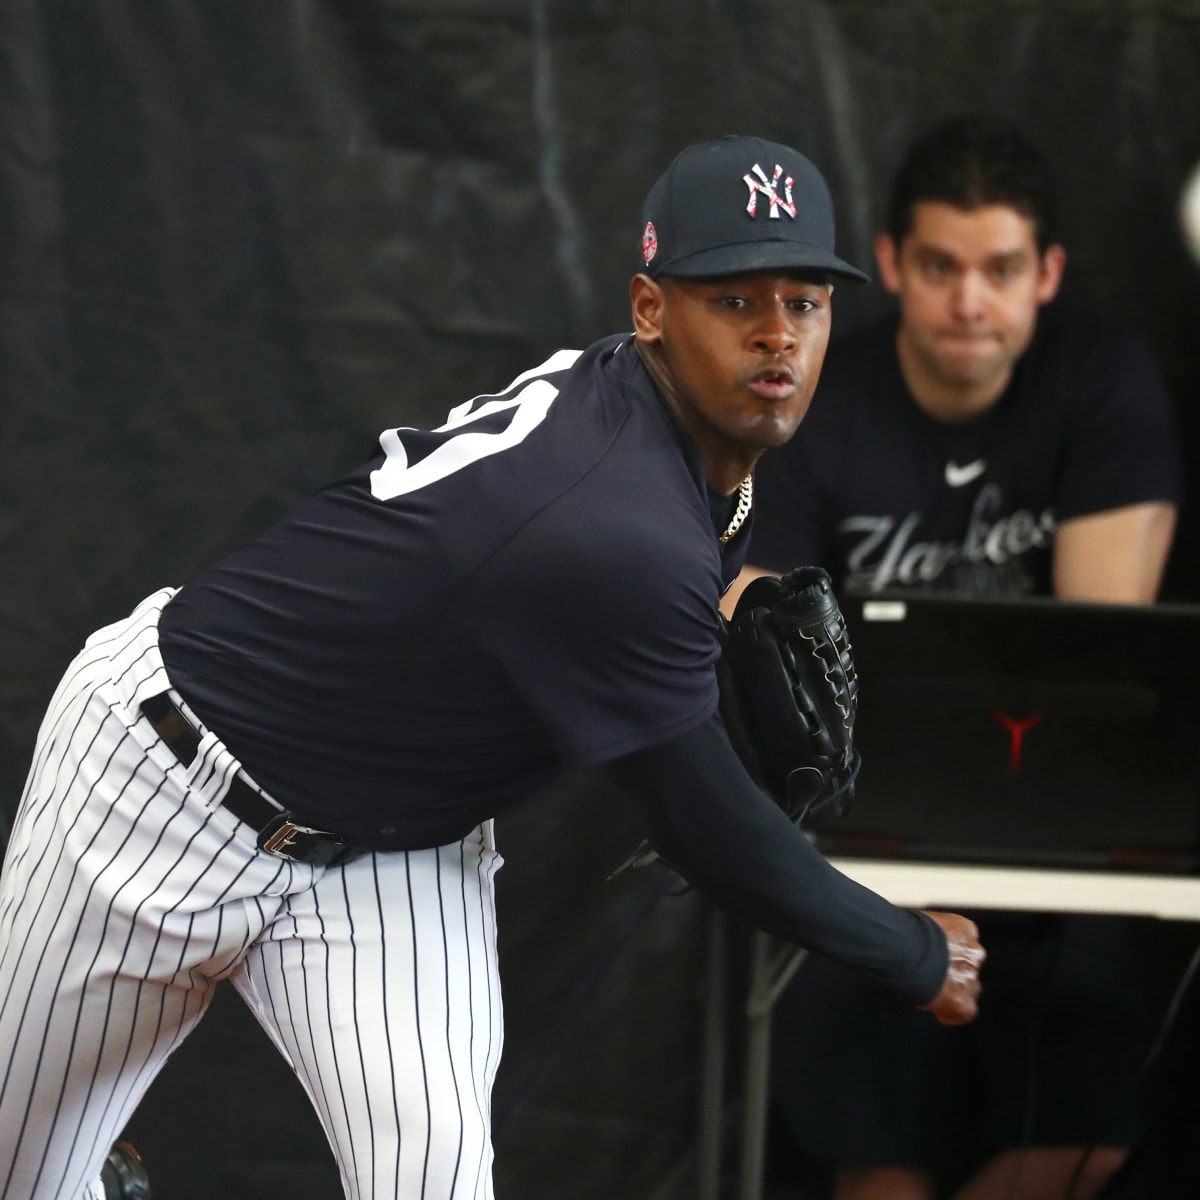 Luis Severino's Future Uncertain After Possible Injury